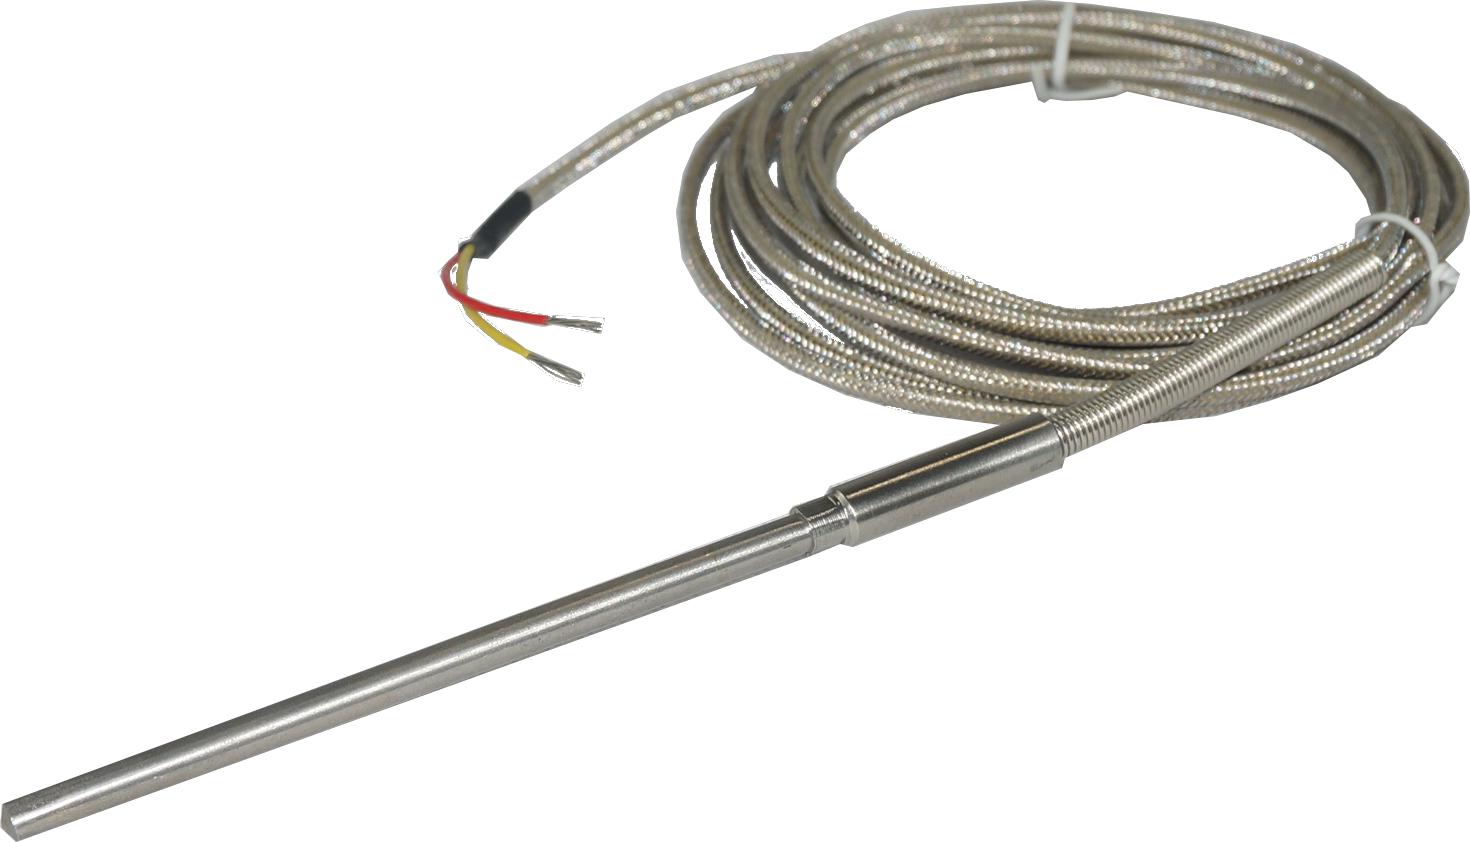 FRTD Series Pt100 RTD MIMS Class A, Standard Sizes and Lengths, Braided SS/Teflon Tail, 304 Stainless Steel Sheath-Temperature Sensor-Fastron Electronics-Fastron Electronics Store